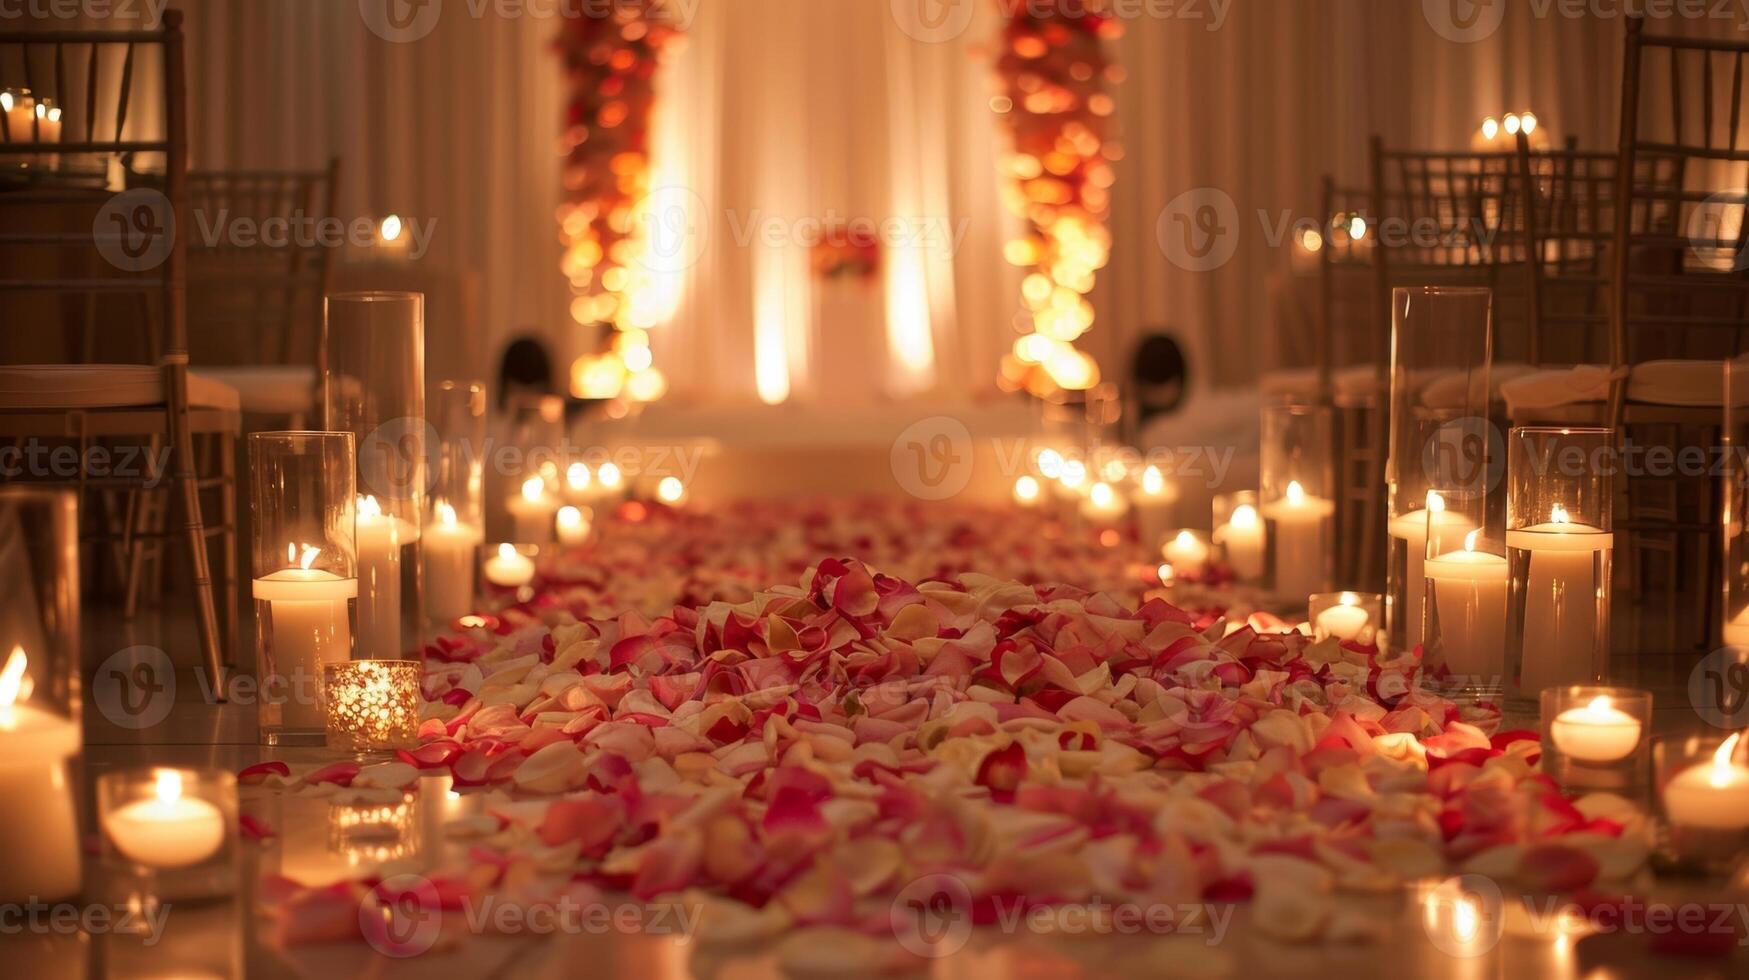 Delicate flower petals and glowing candles decorate the stage setting the scene for a magical evening. 2d flat cartoon photo